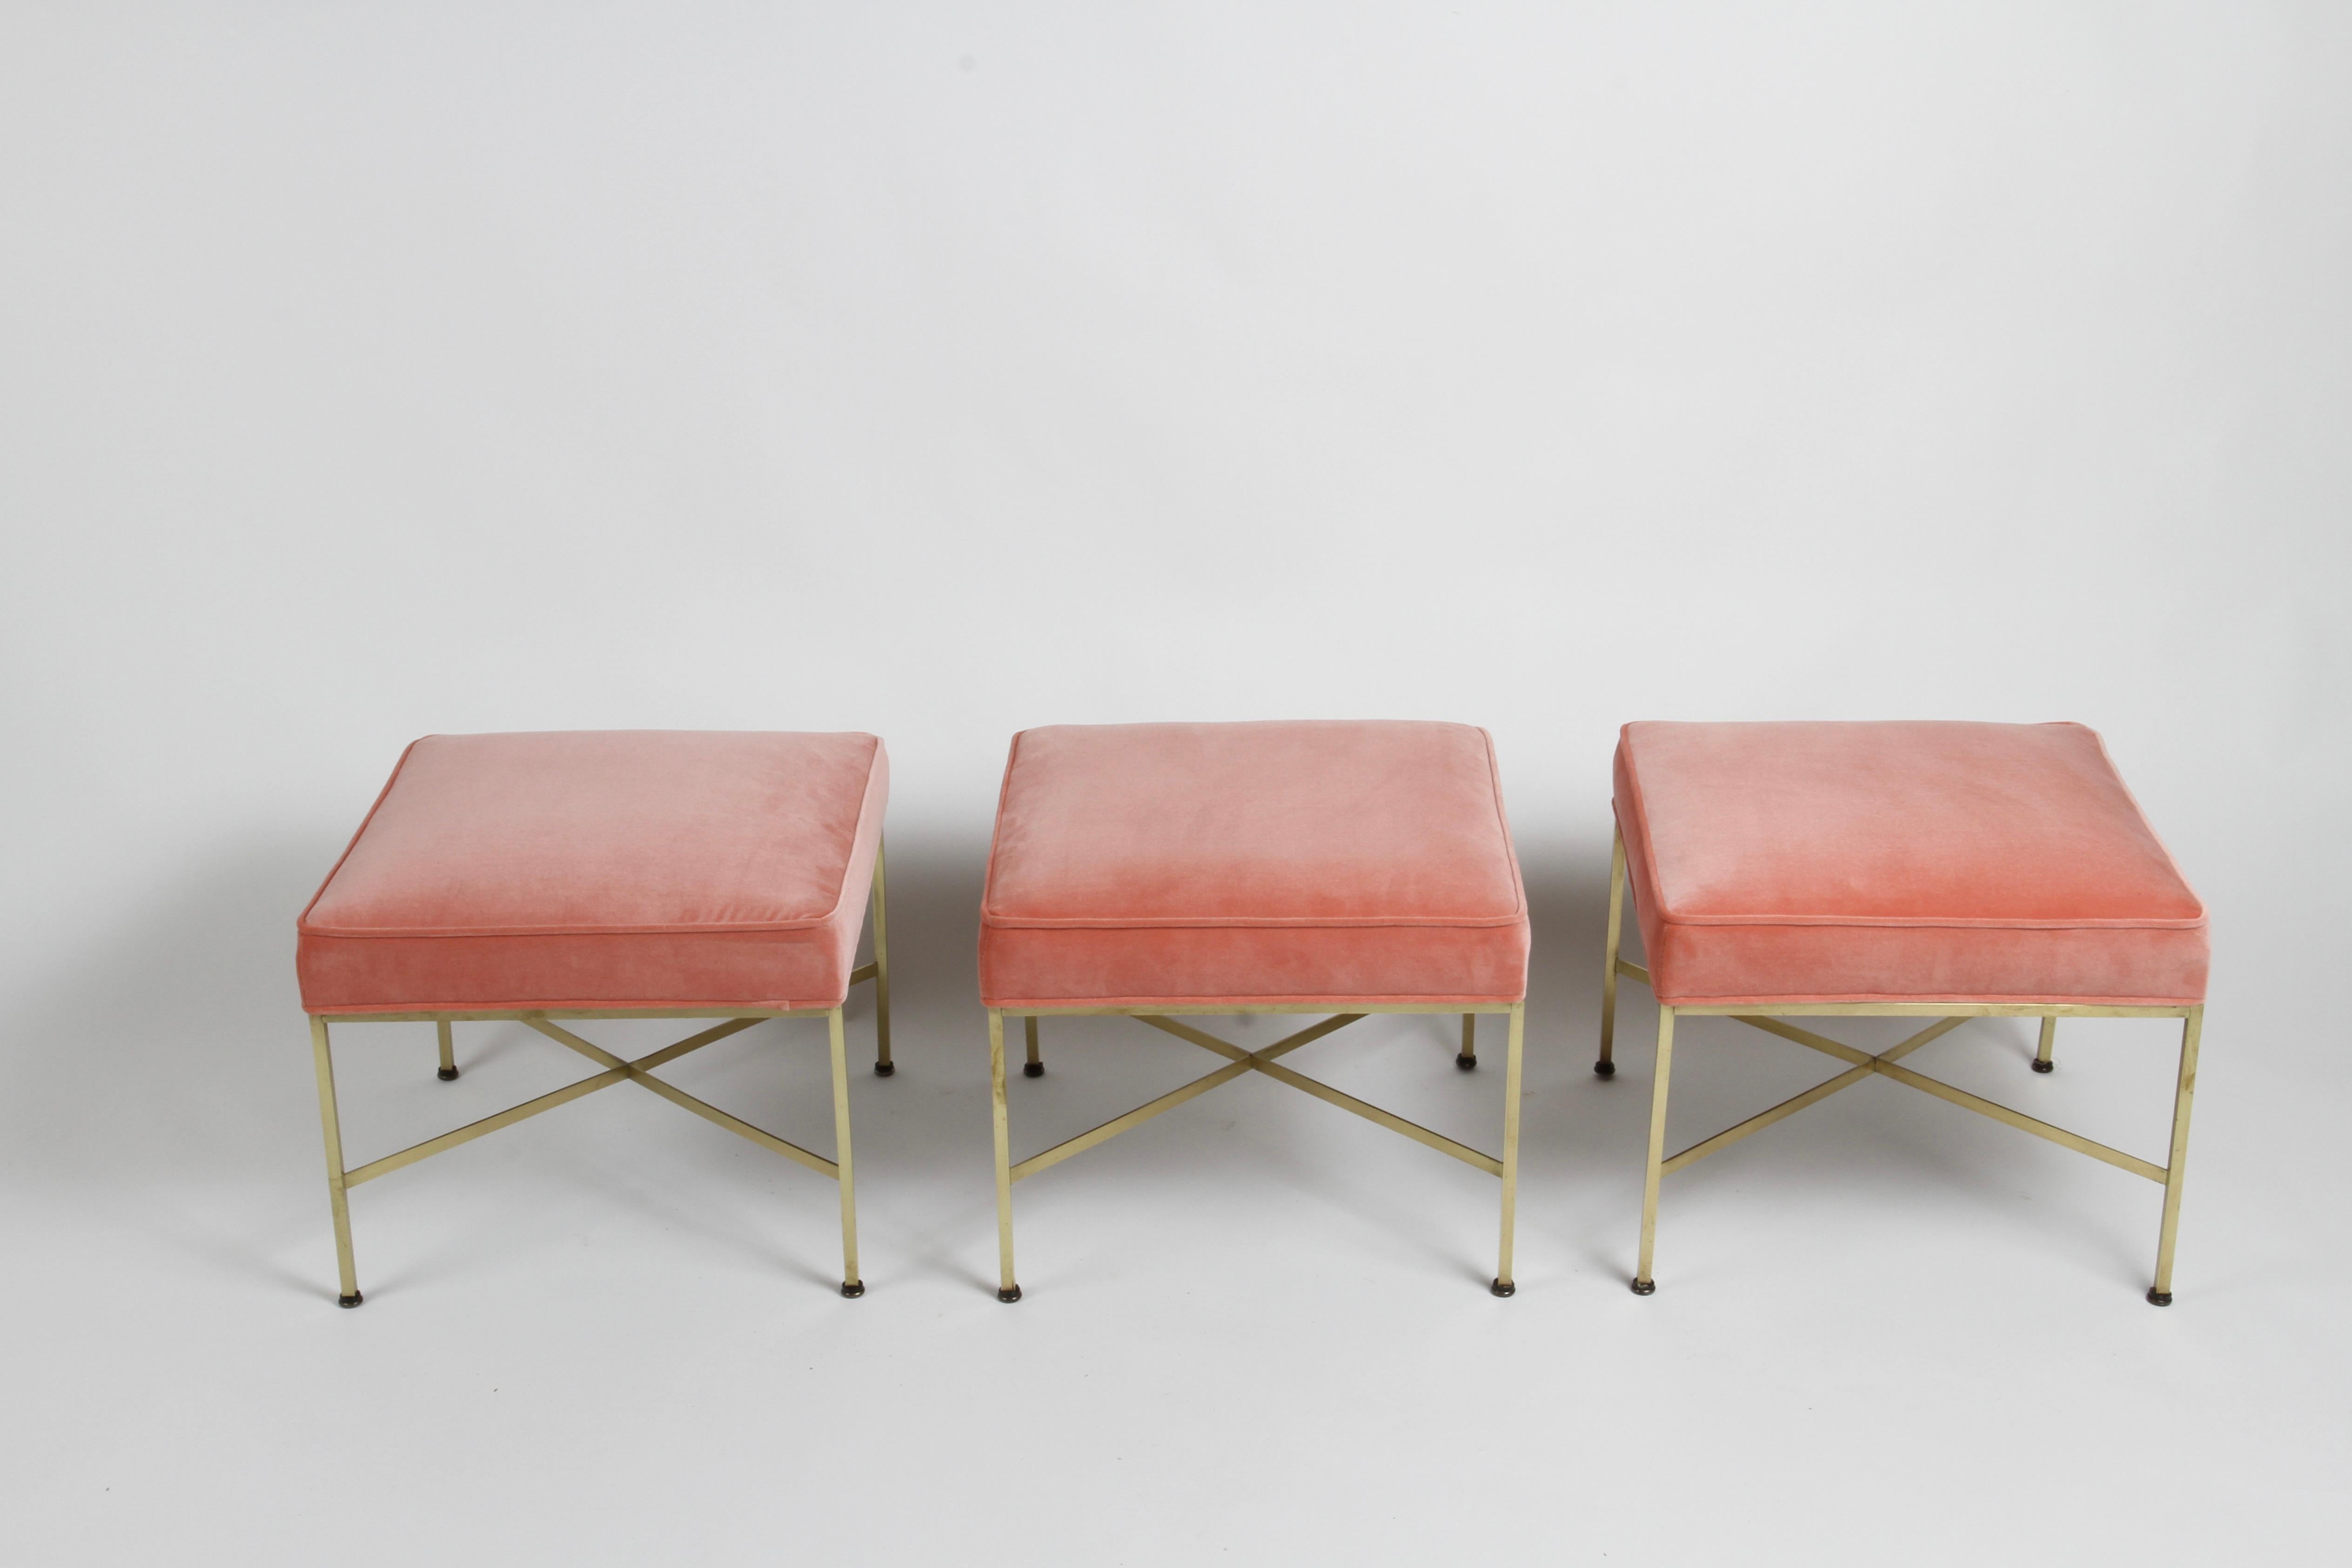 Set of 3 fully restored Mid-Century Modern Paul McCobb model 1306 for Directional brass X base ottomans or stools , reupholstered in Holly Hunt Salmon colored velvet. Brass has been polished, unlacquered. New foam and original glides. No lablels. 